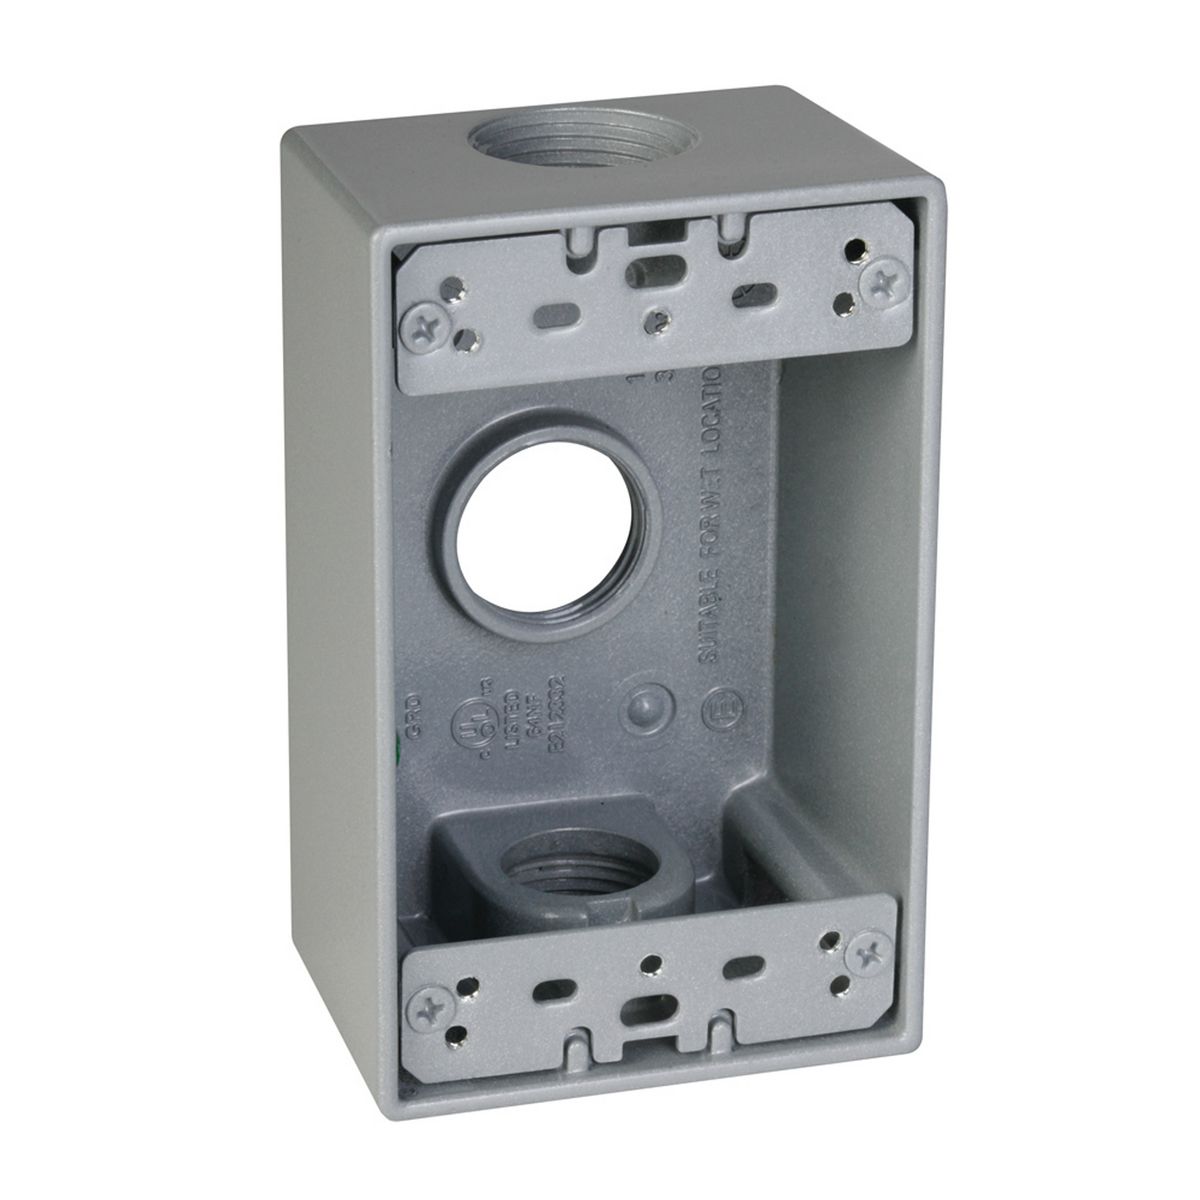 TAY SB375S 1G WP BOX (3) 3/4 IN. OUTLETS - GRAY